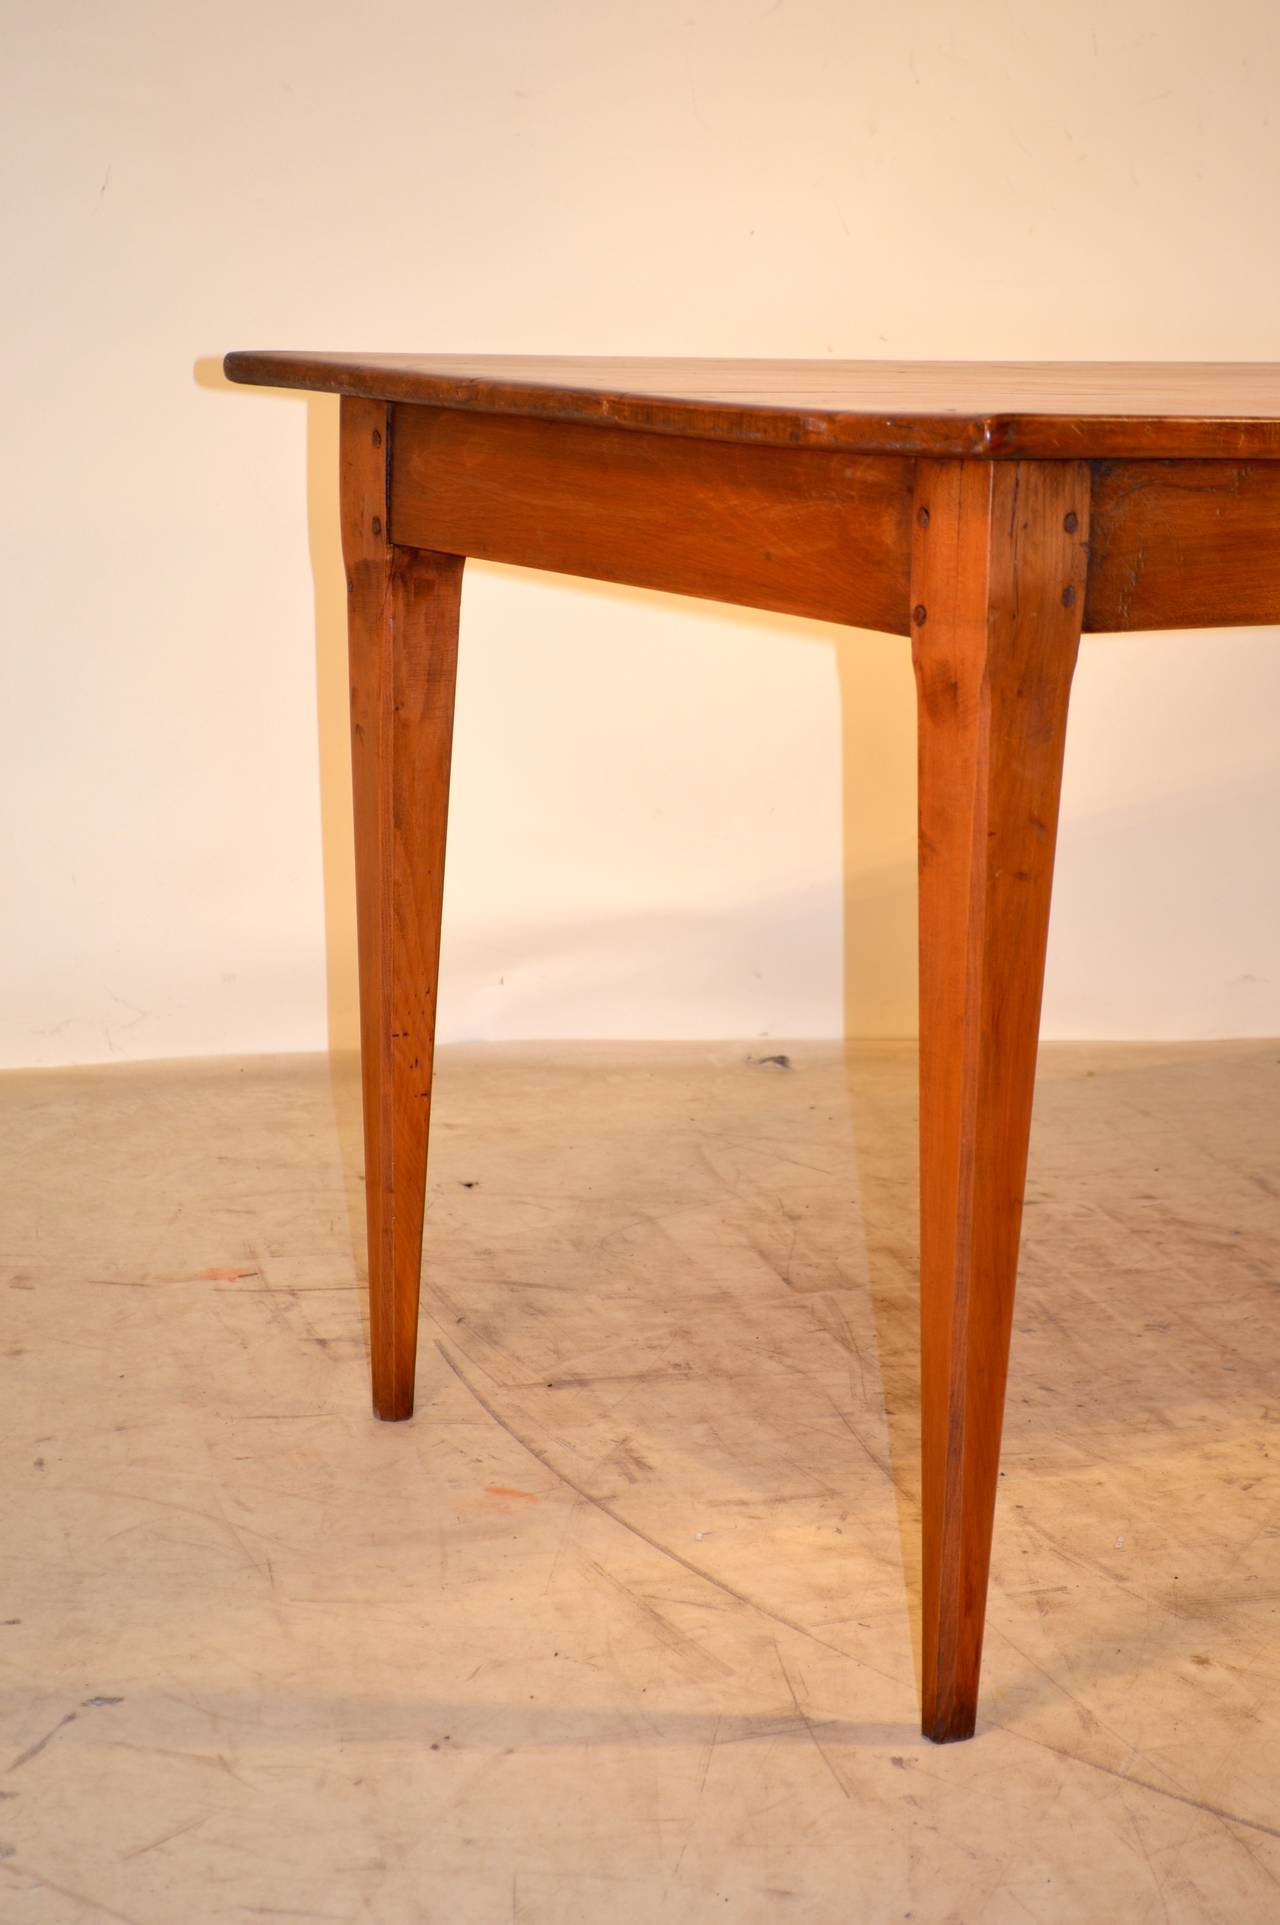 19th-C. French Cherry farm table with a plank top, a simple apron containing one drawer, following down to tapered legs.  Gorgeous color.